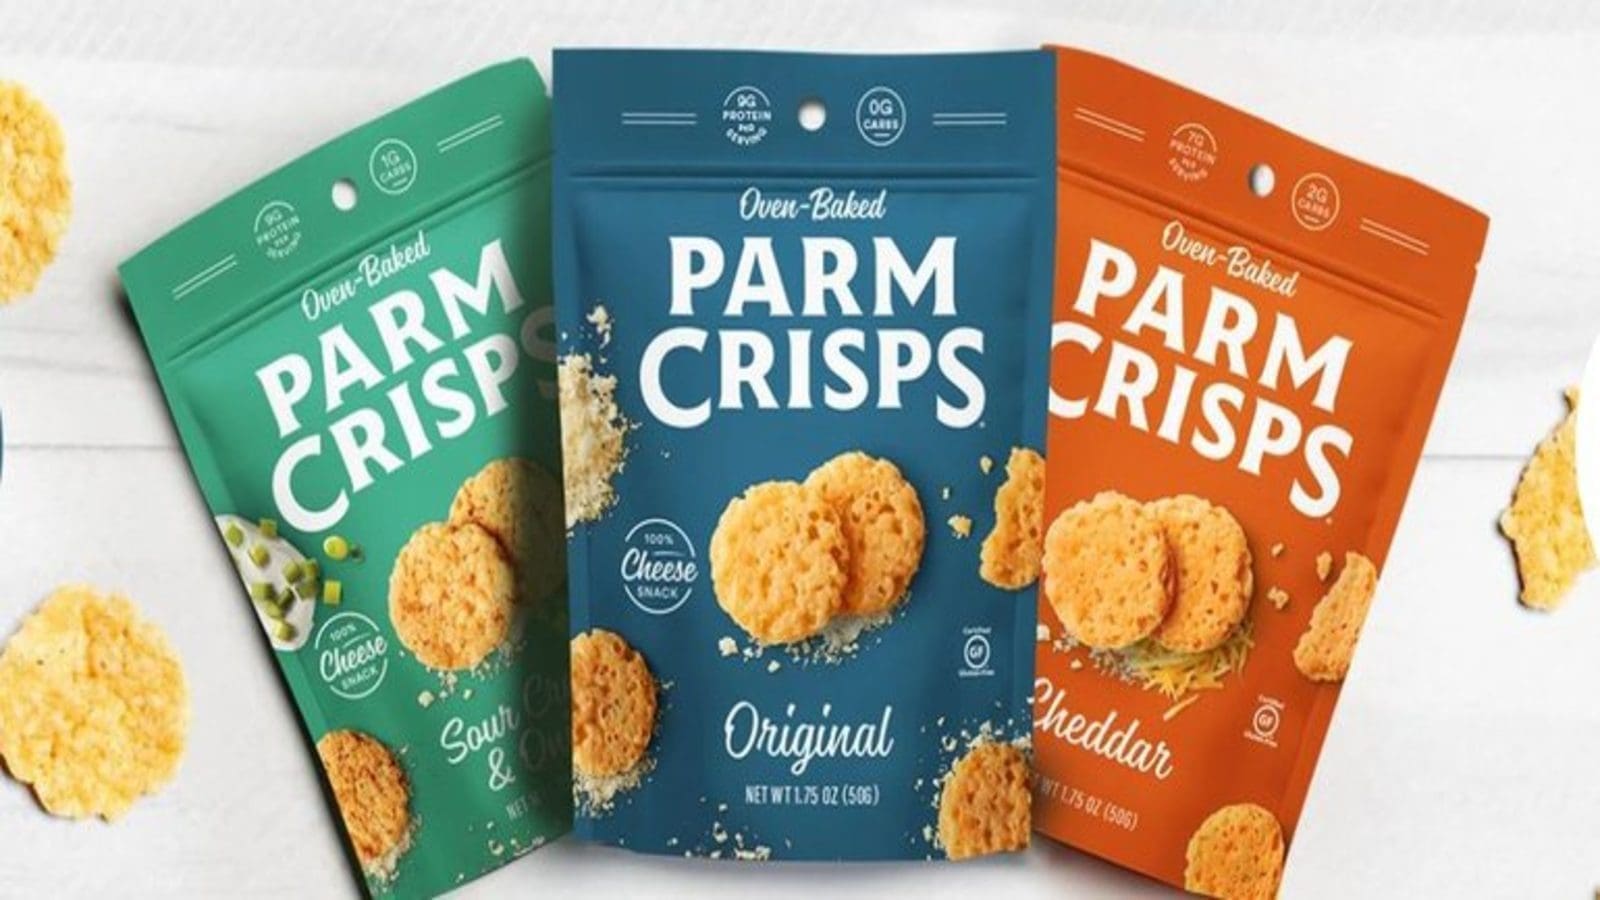 Hain Celestial bolsters presence in US snack market with acquisition of cheese crisp and cookie brands